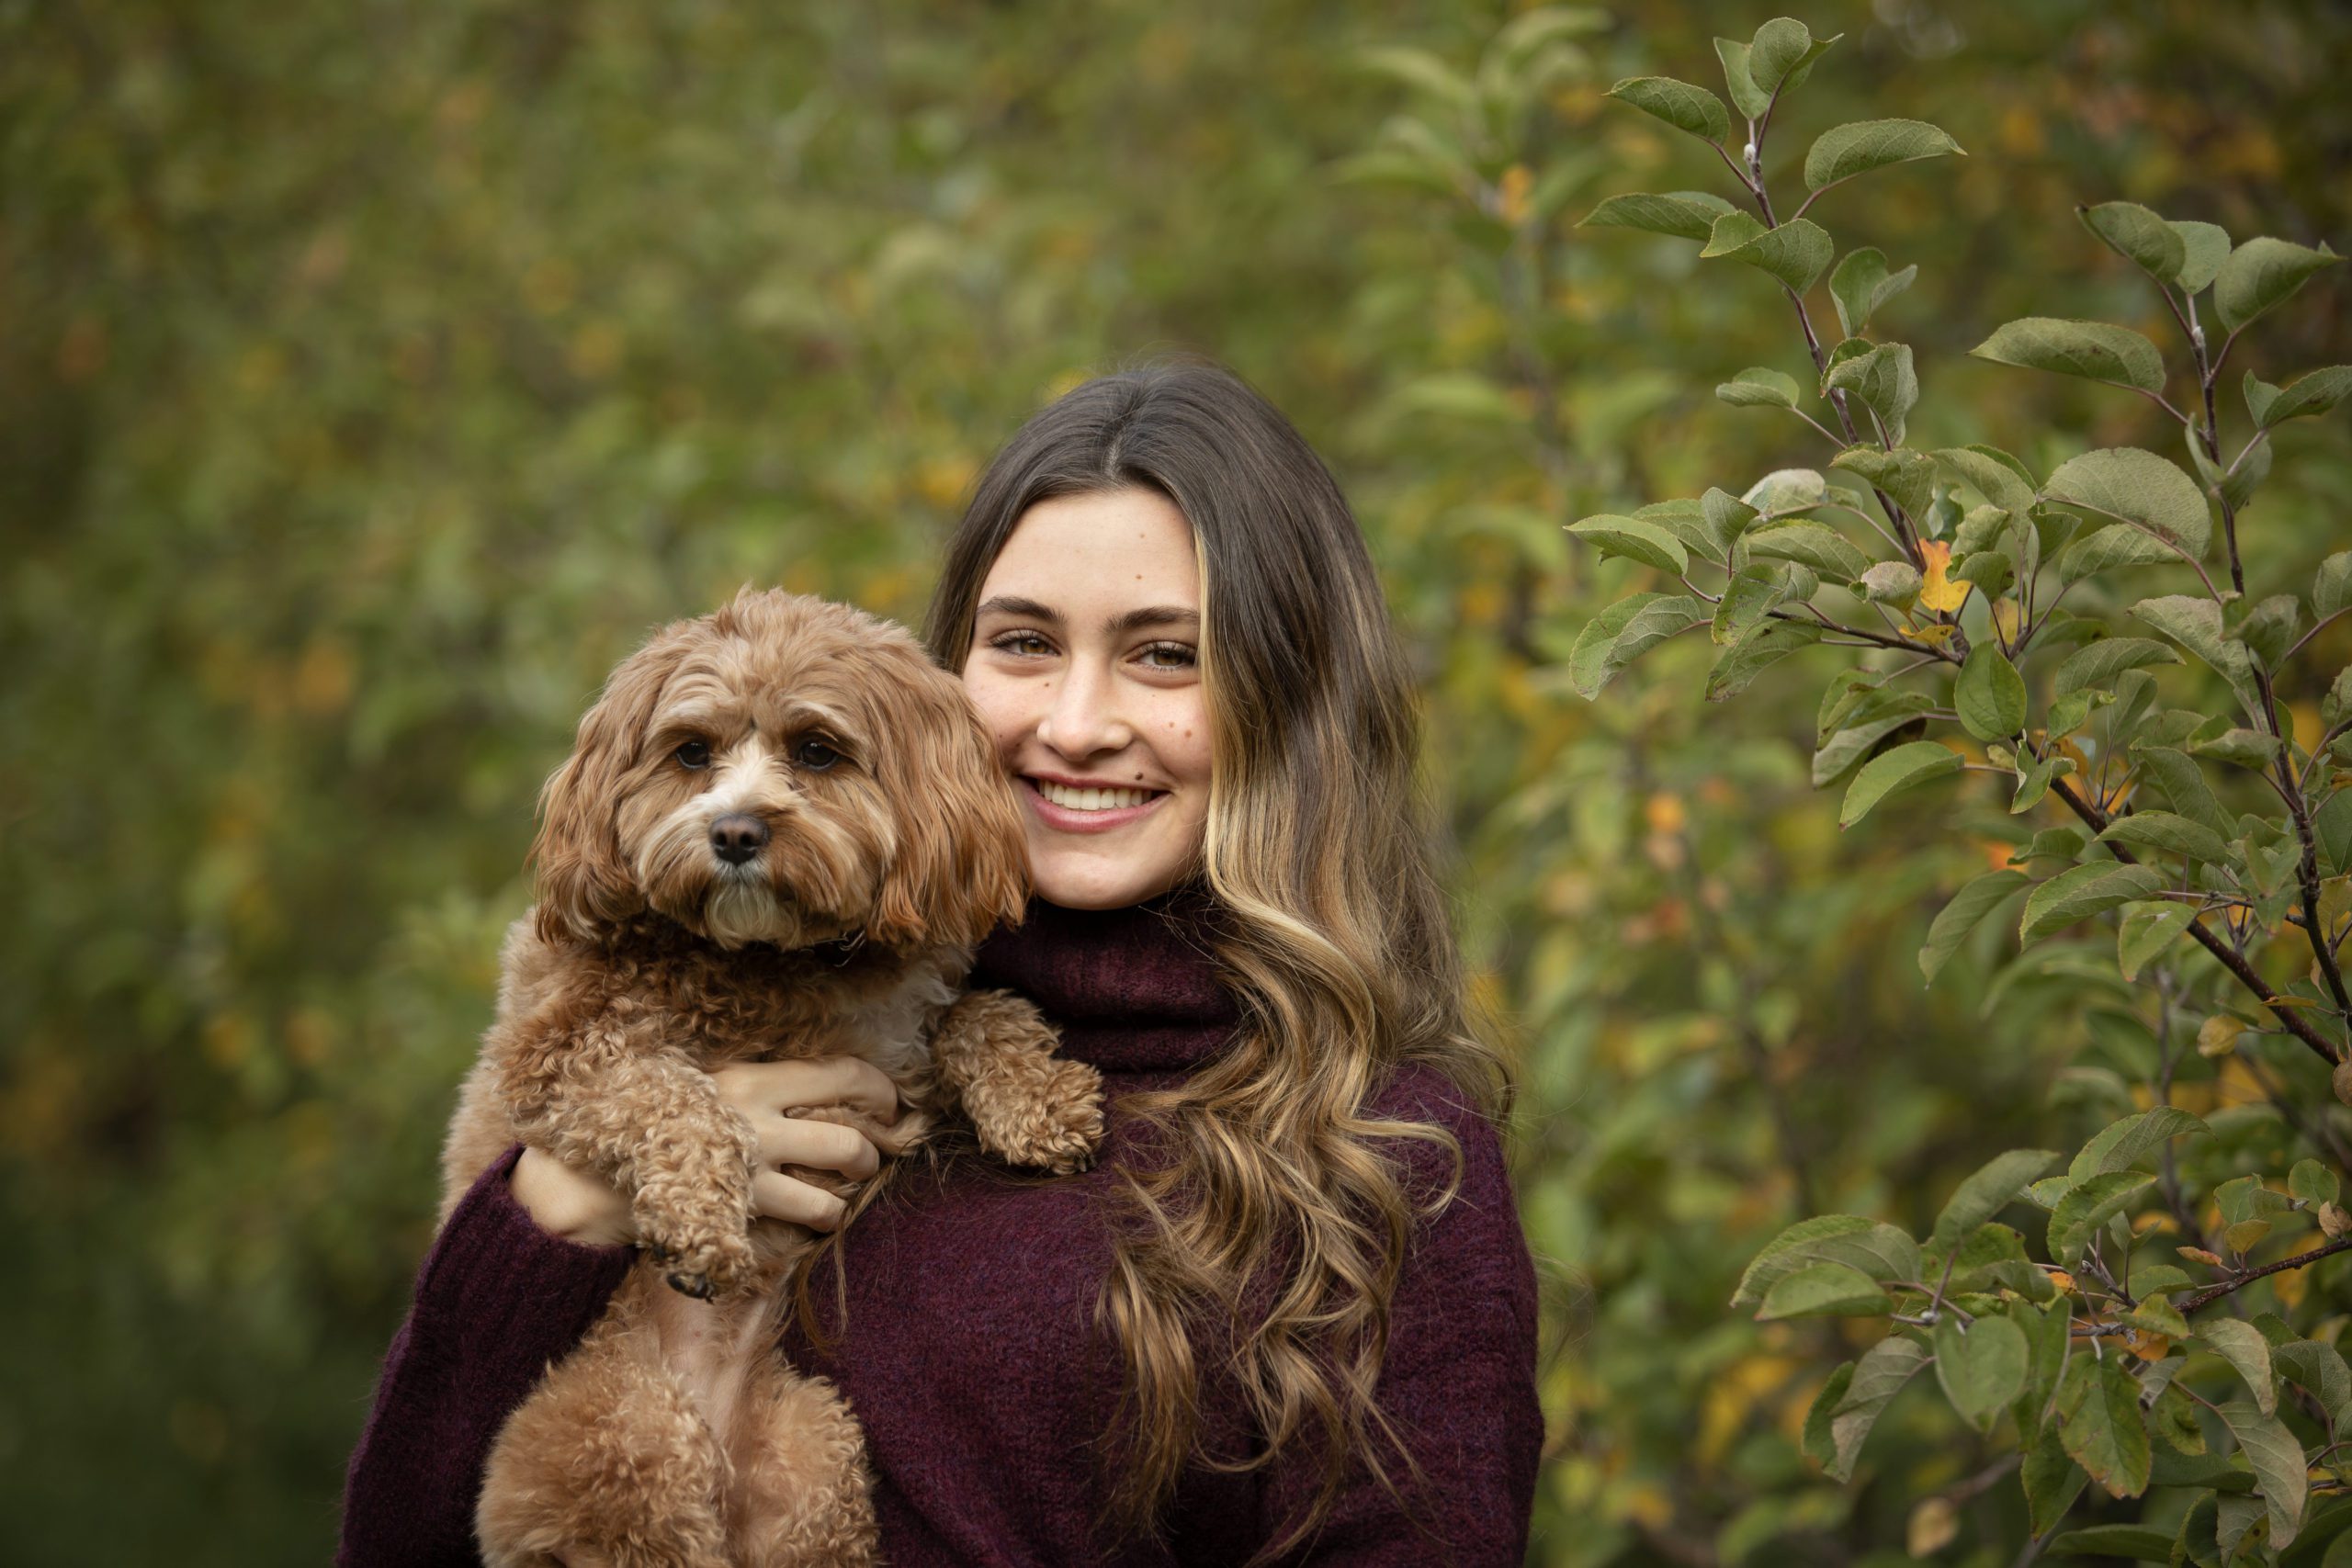 Senior photo with dog - Kerry Goodwin Photography